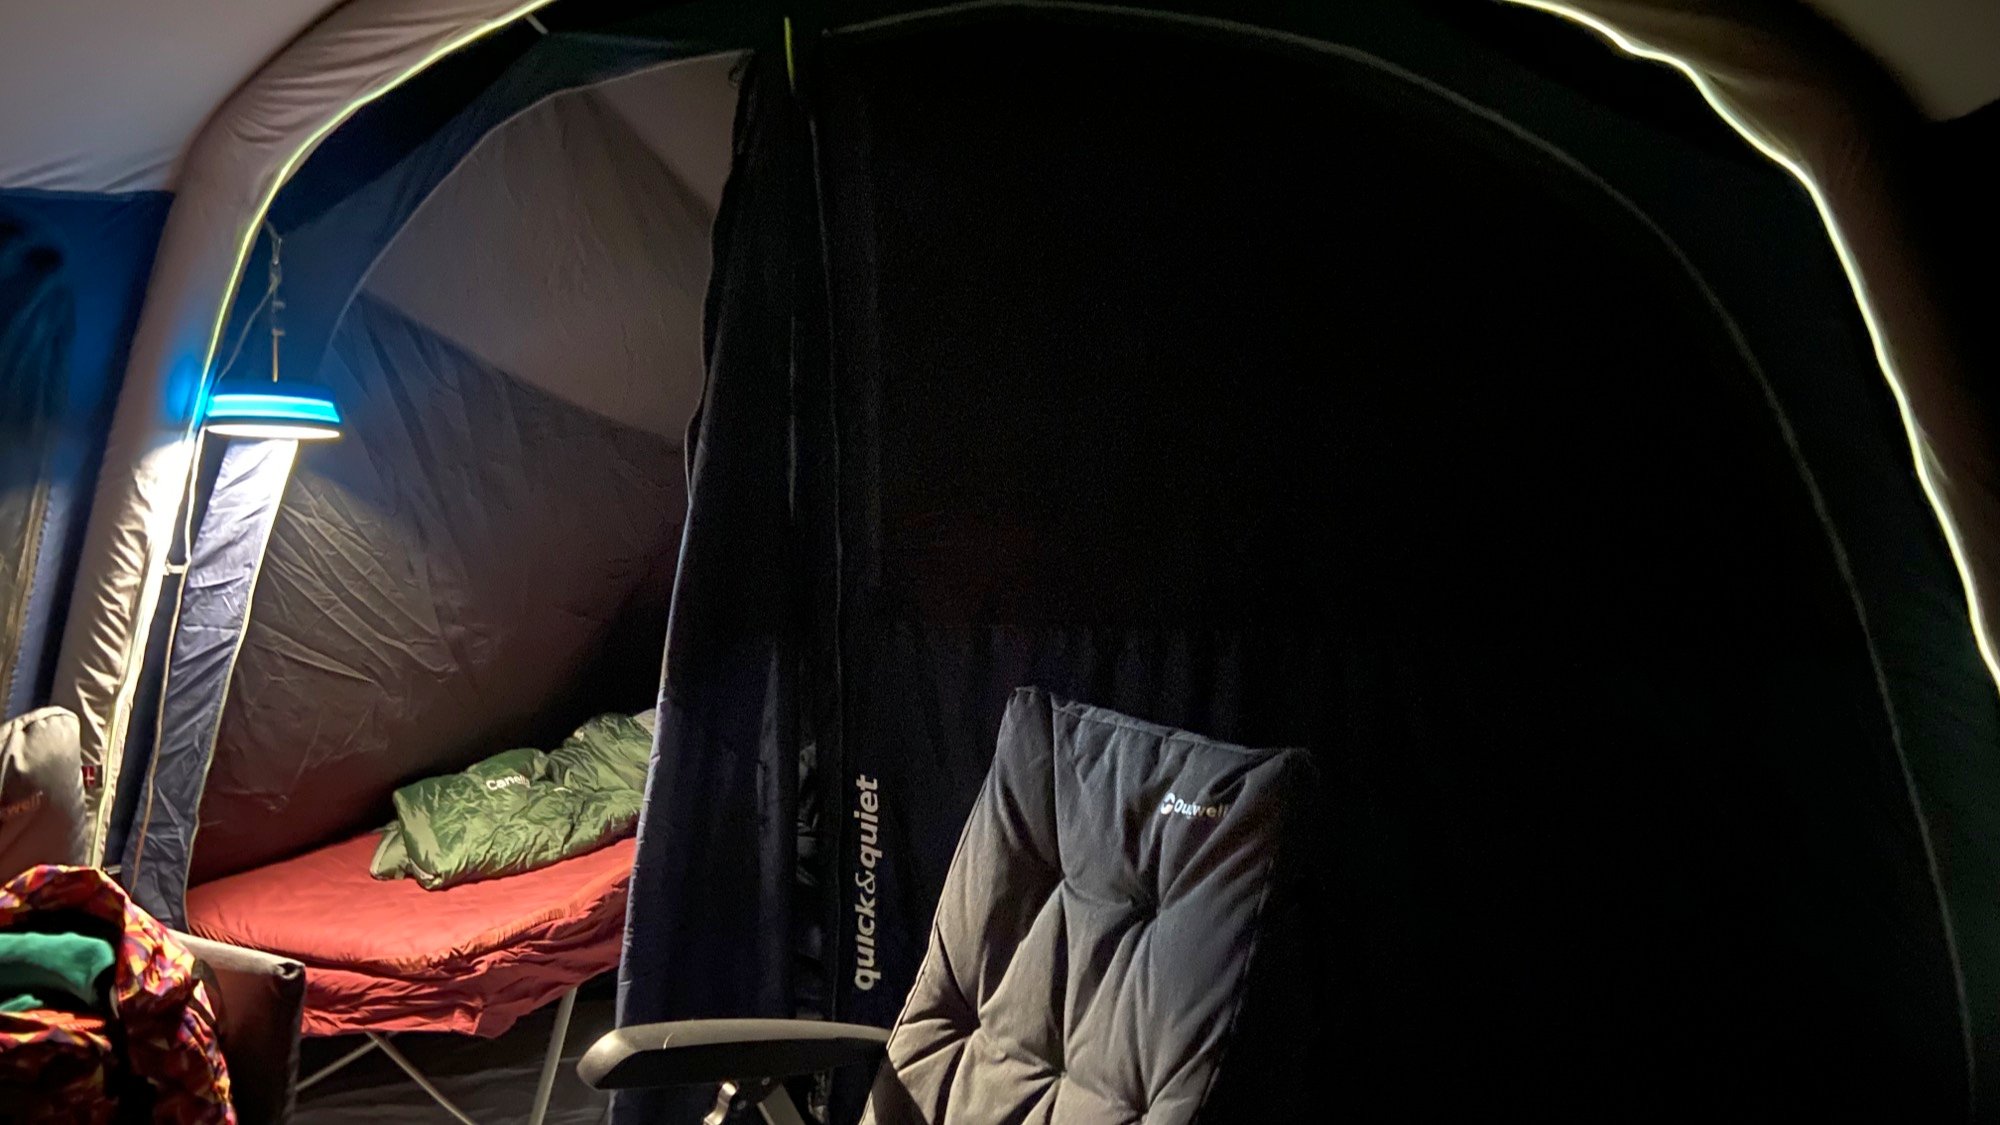 The Outwell Night Light System (ONS) inside the tent